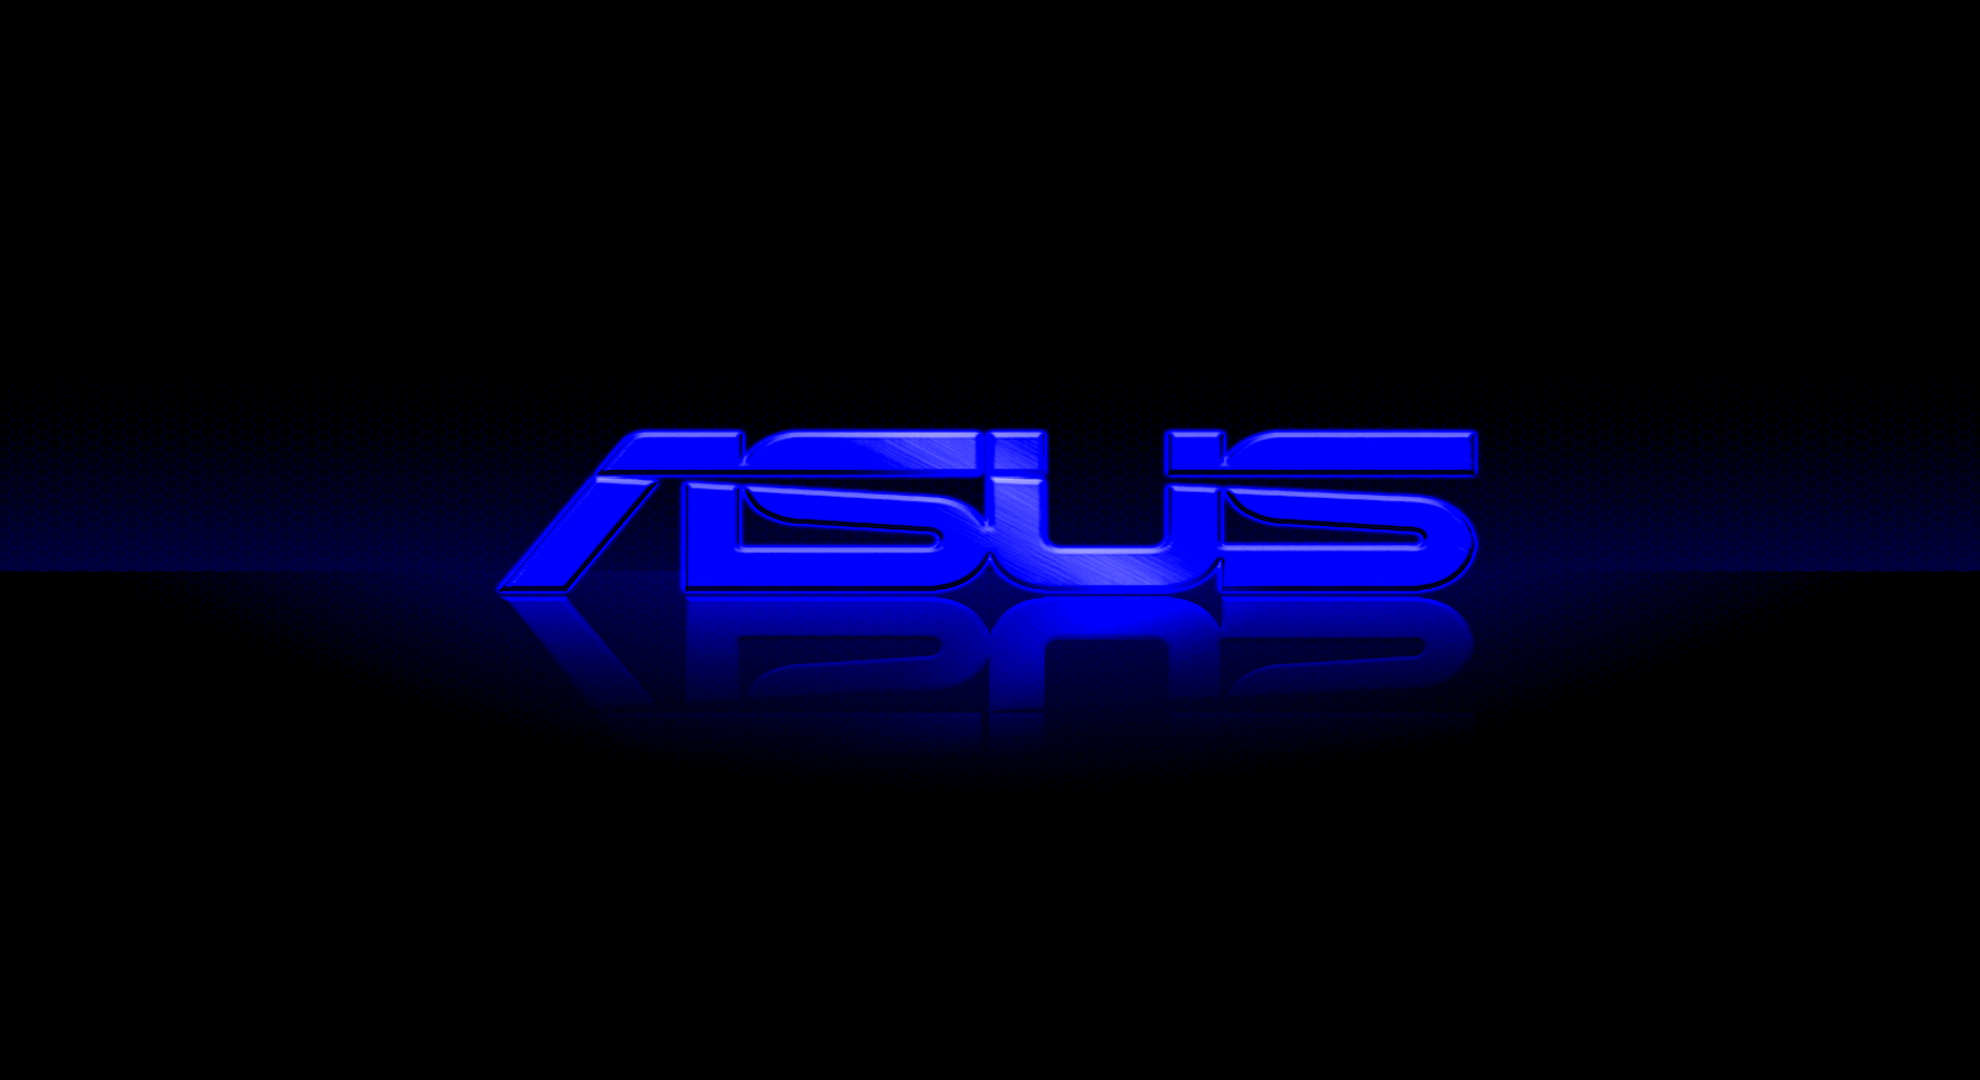 Asus HD Wallpaper and Background